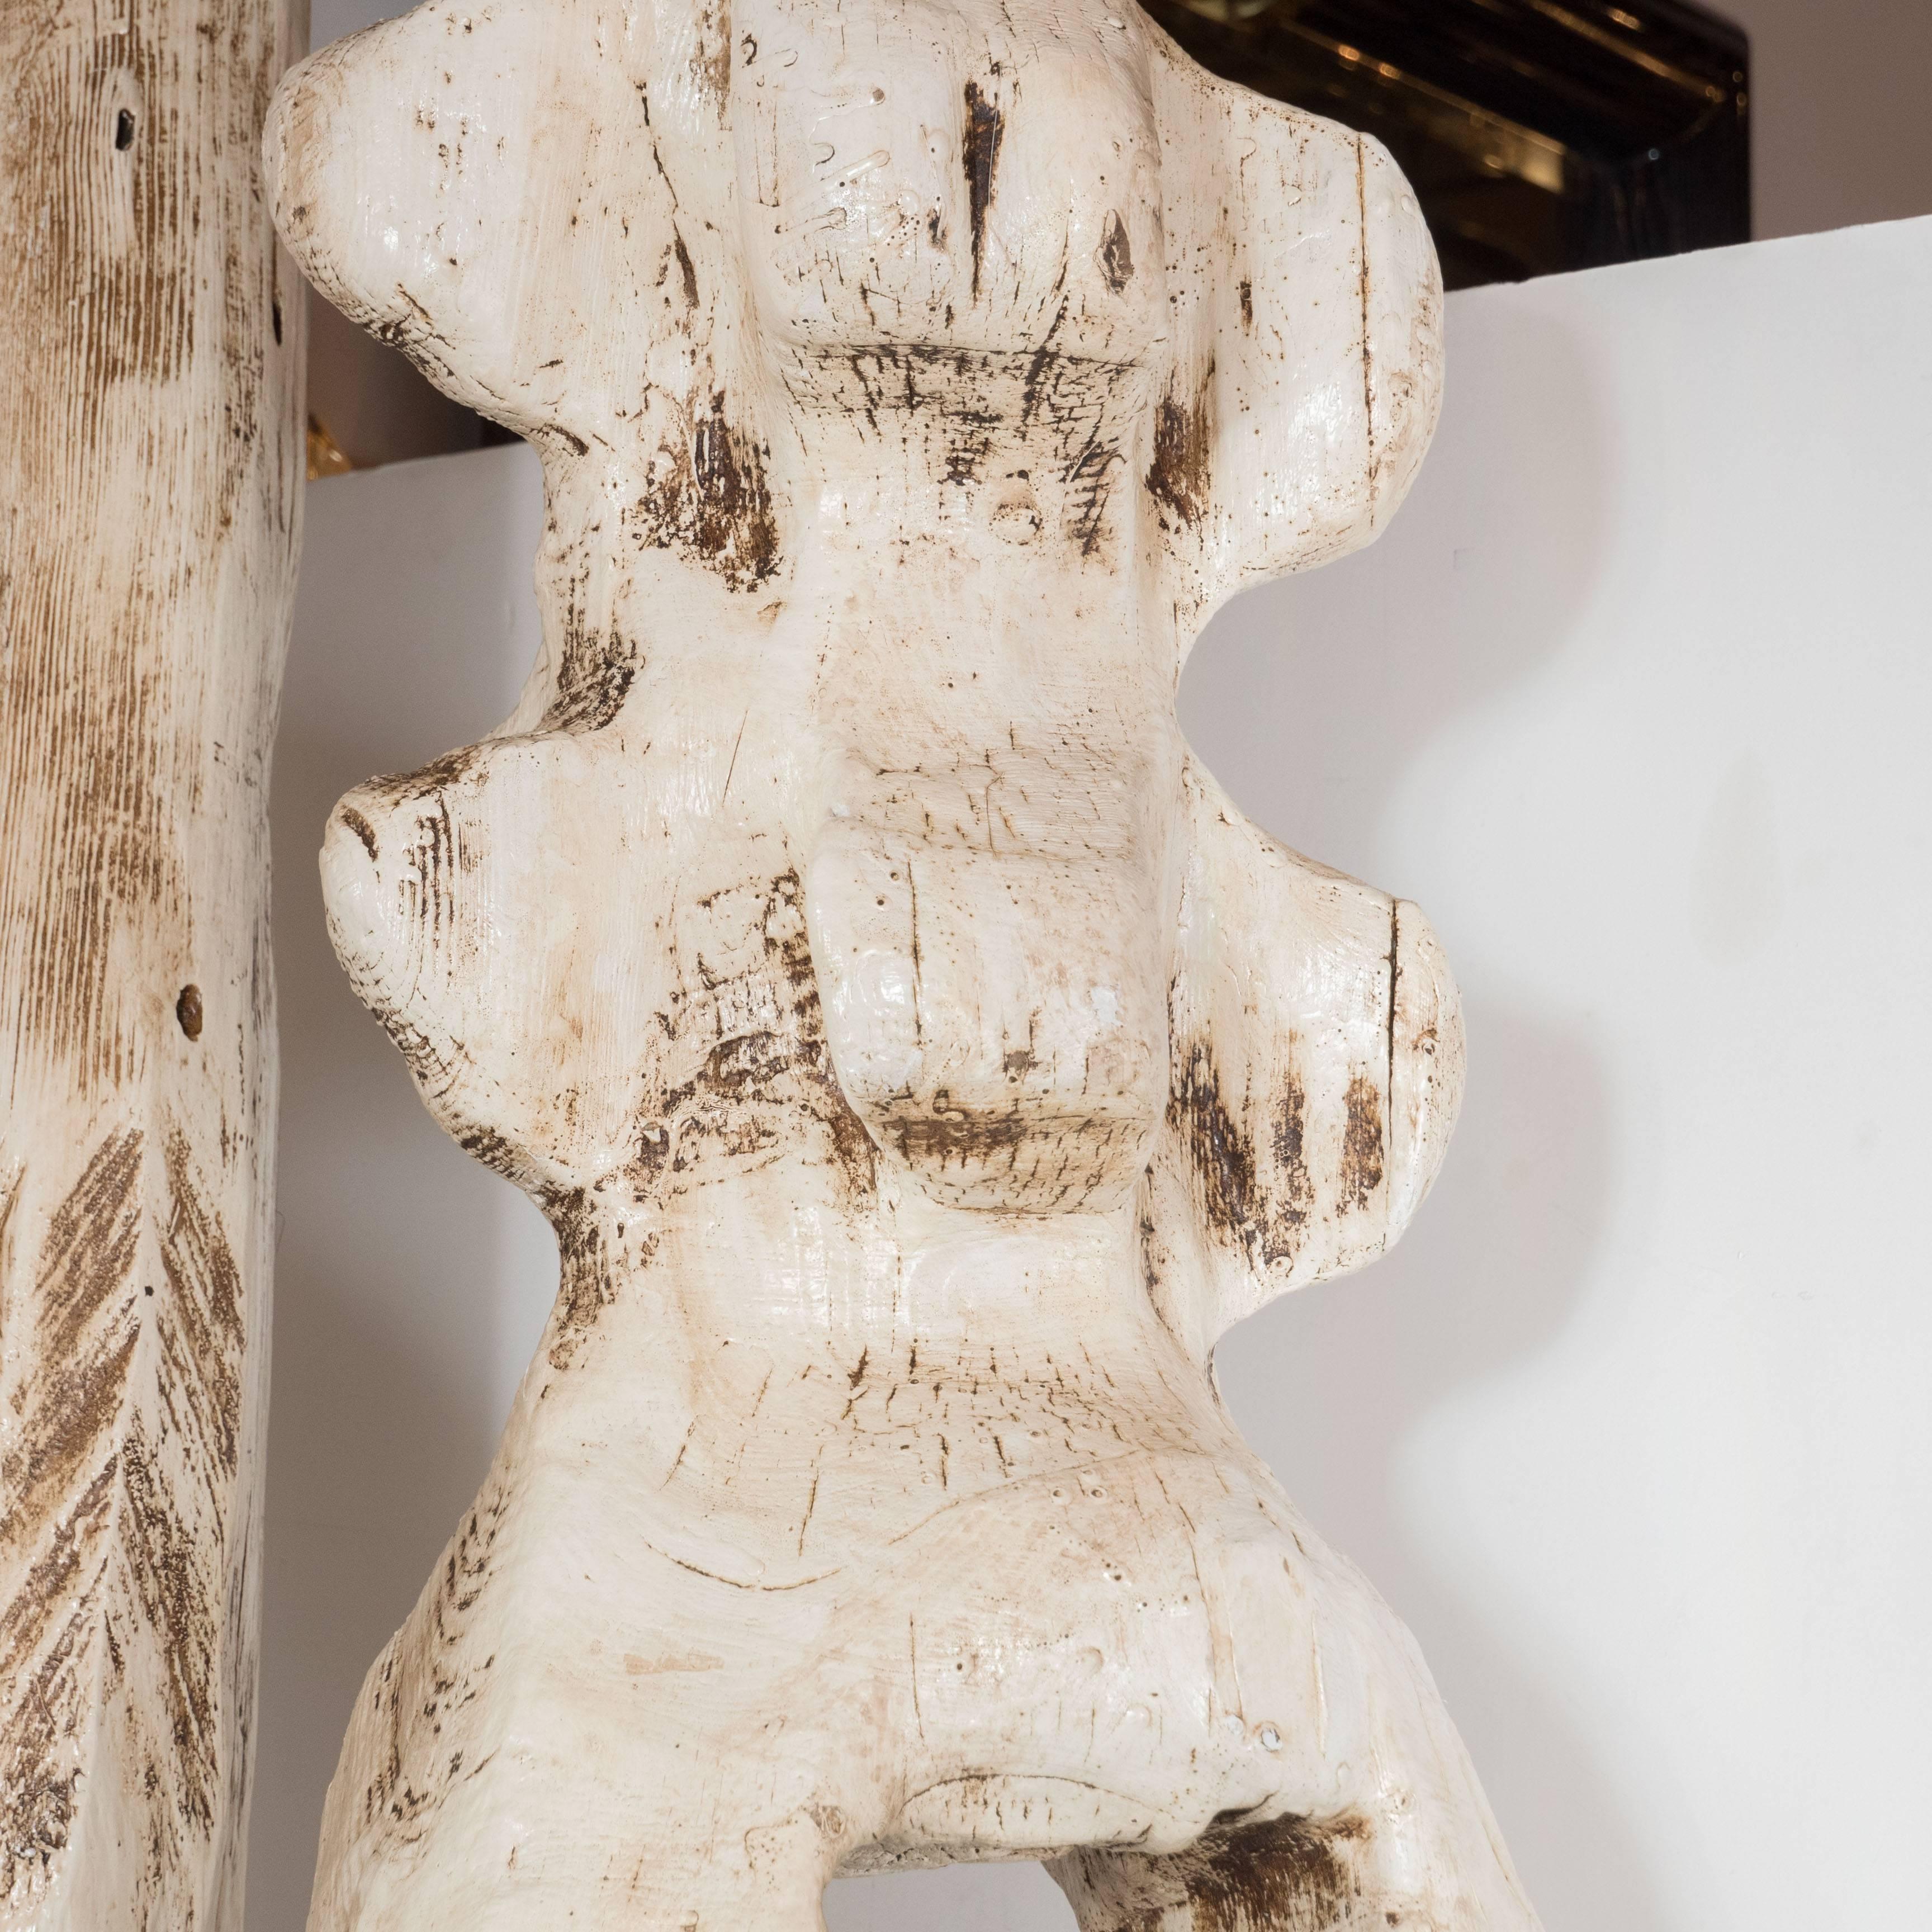 Organic Modern Monumental Pair of White Washed Hand Organic Sculpted Totems by Espen Eiborg